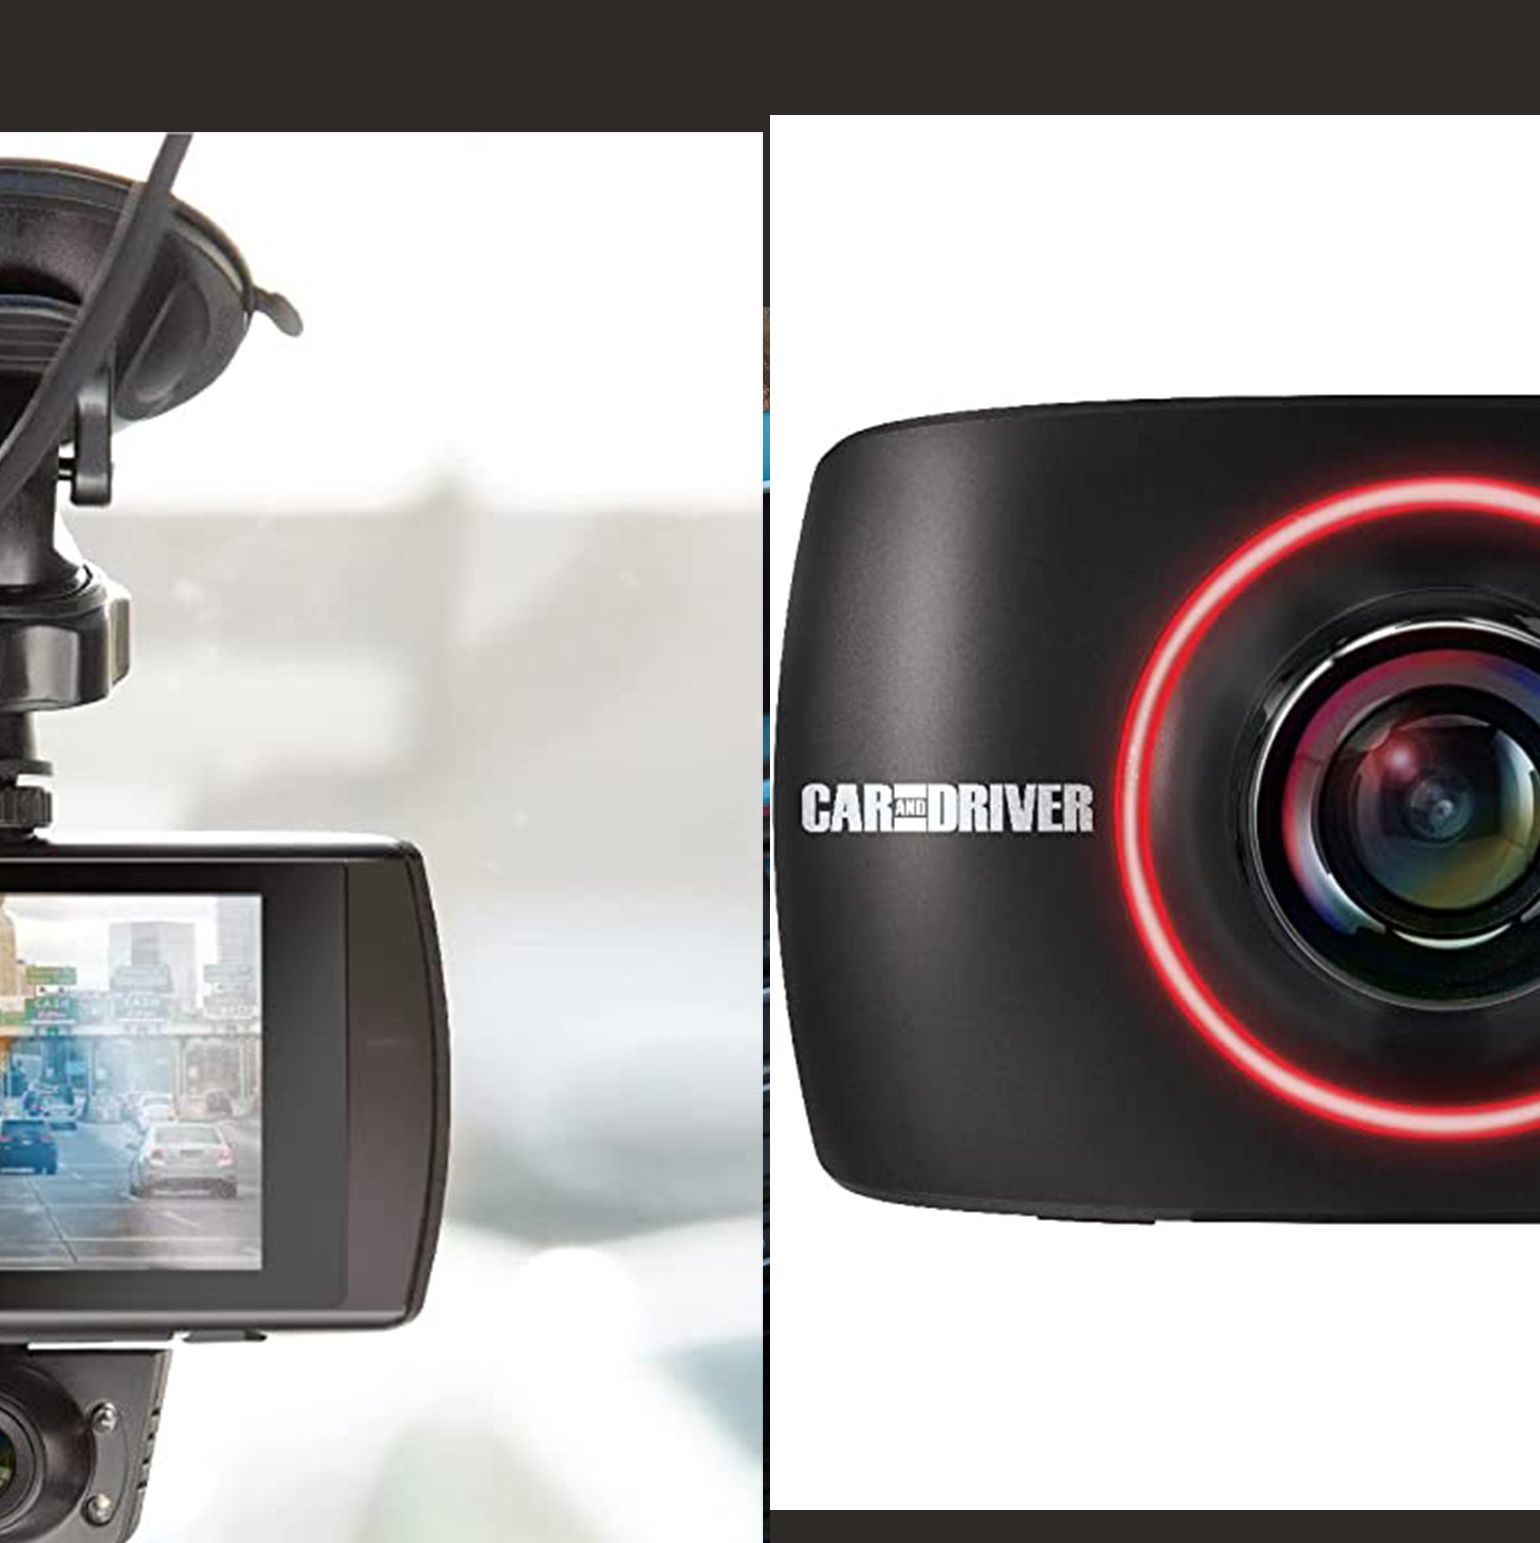 Top-Rated Dash Cams to Record Your Every Move—and Then Some